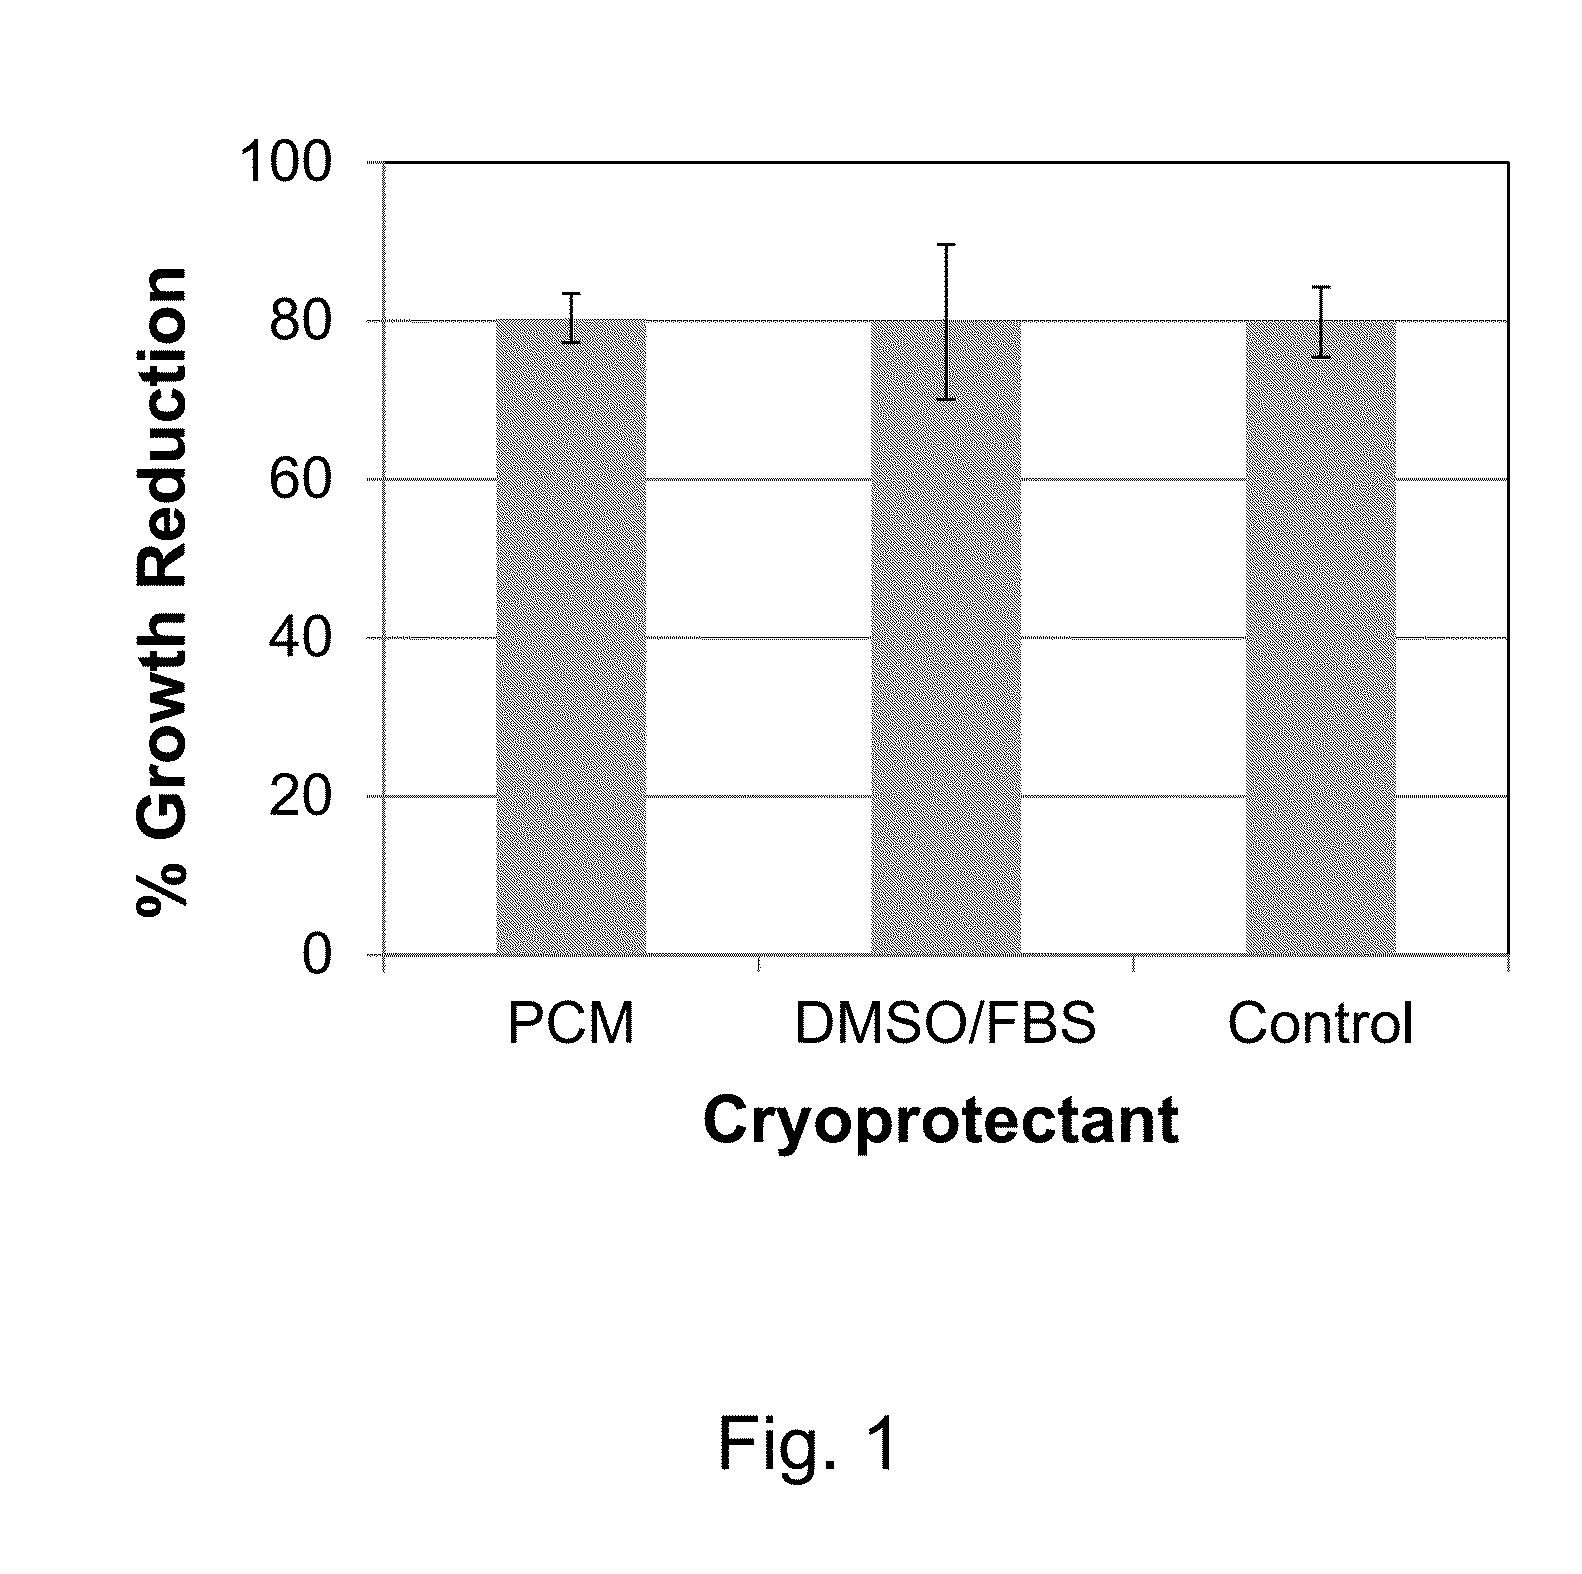 Cryopreservation tools and methods